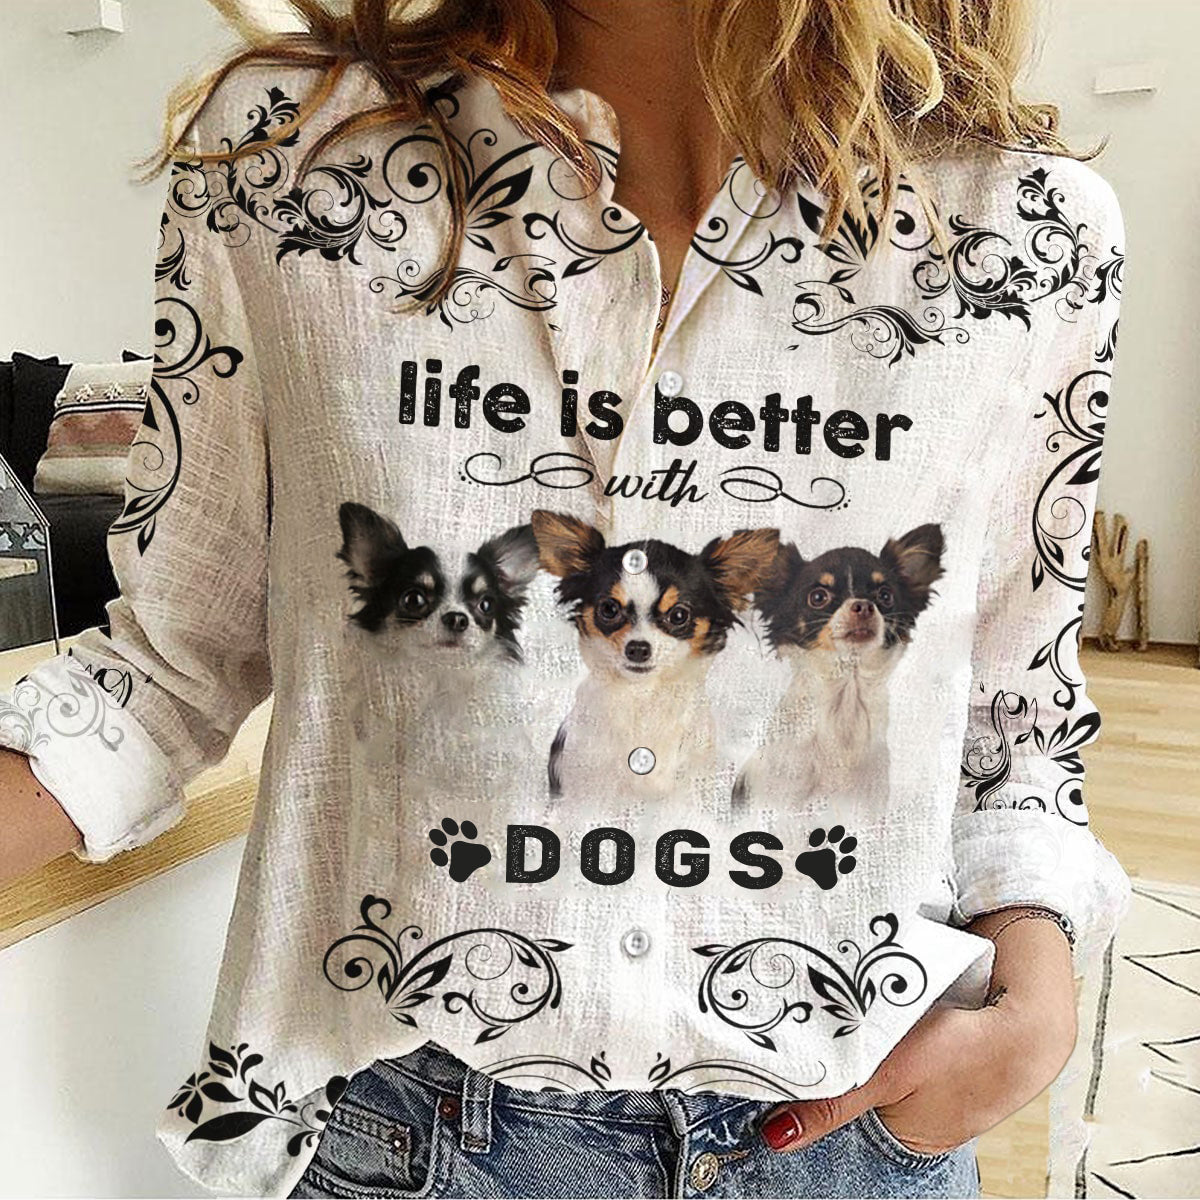 Chihuahua 2-Life Is Better With Dogs Women's Long-Sleeve Shirt